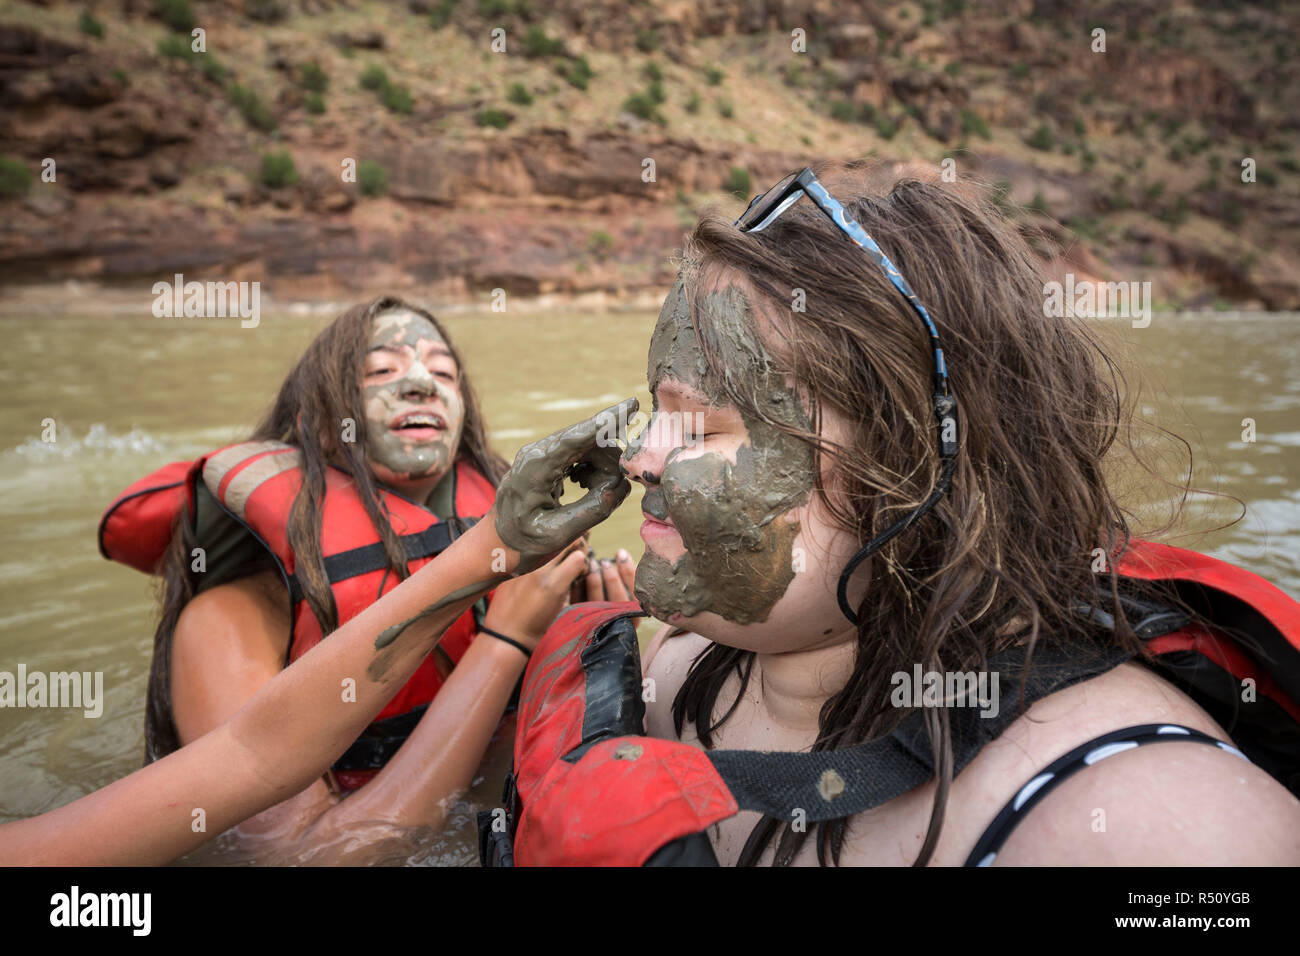 Two children playing in the river and painting mud on each others faces while on a Green river rafting trip, Desolation/Gray Canyon section, Utah, USA Stock Photo